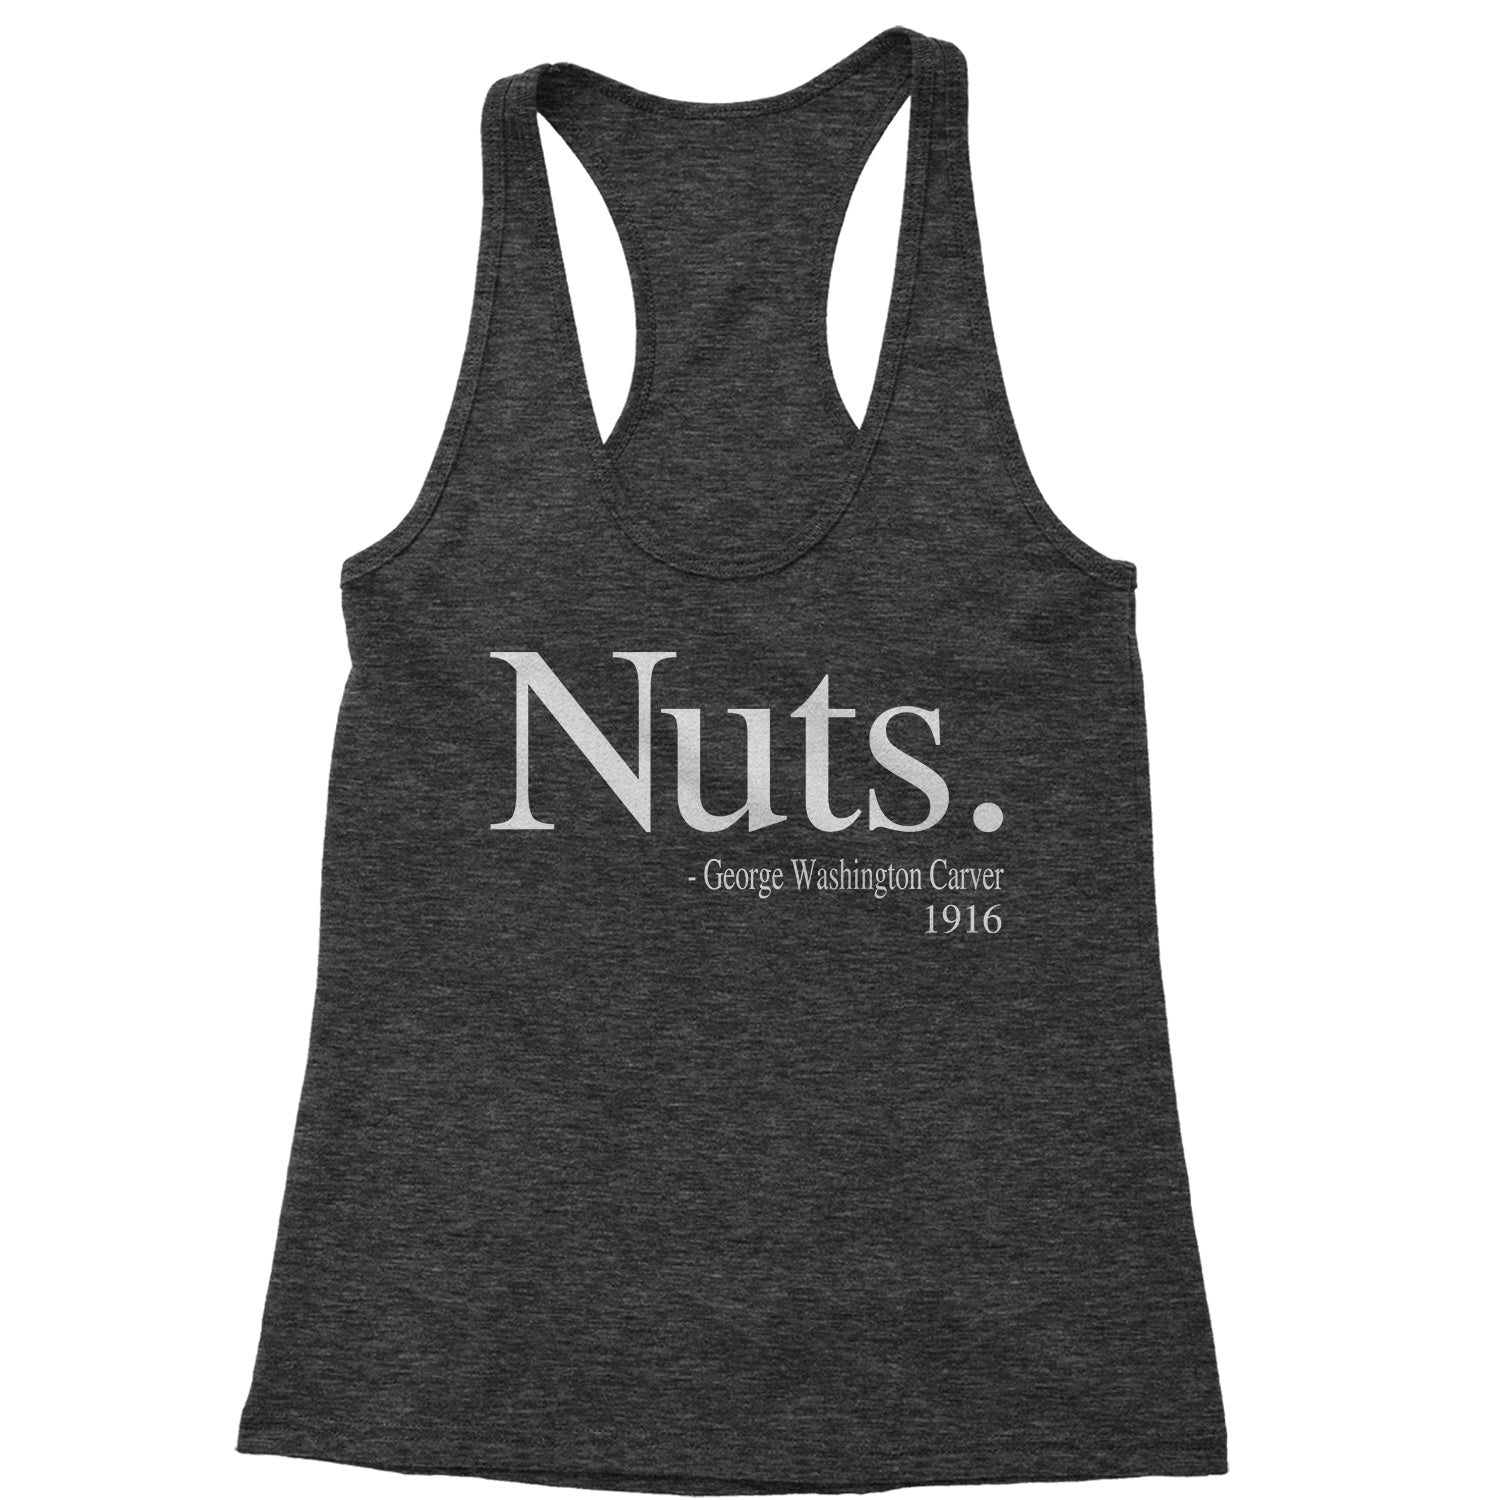 Nuts Quote George Washington Carver Racerback Tank Top for Women african, african american, afro, american, black, carver, george, go, harriet, history, malcolm, me, nah, nuts, out, parks, rosa, try, tubman, washington, we, x by Expression Tees